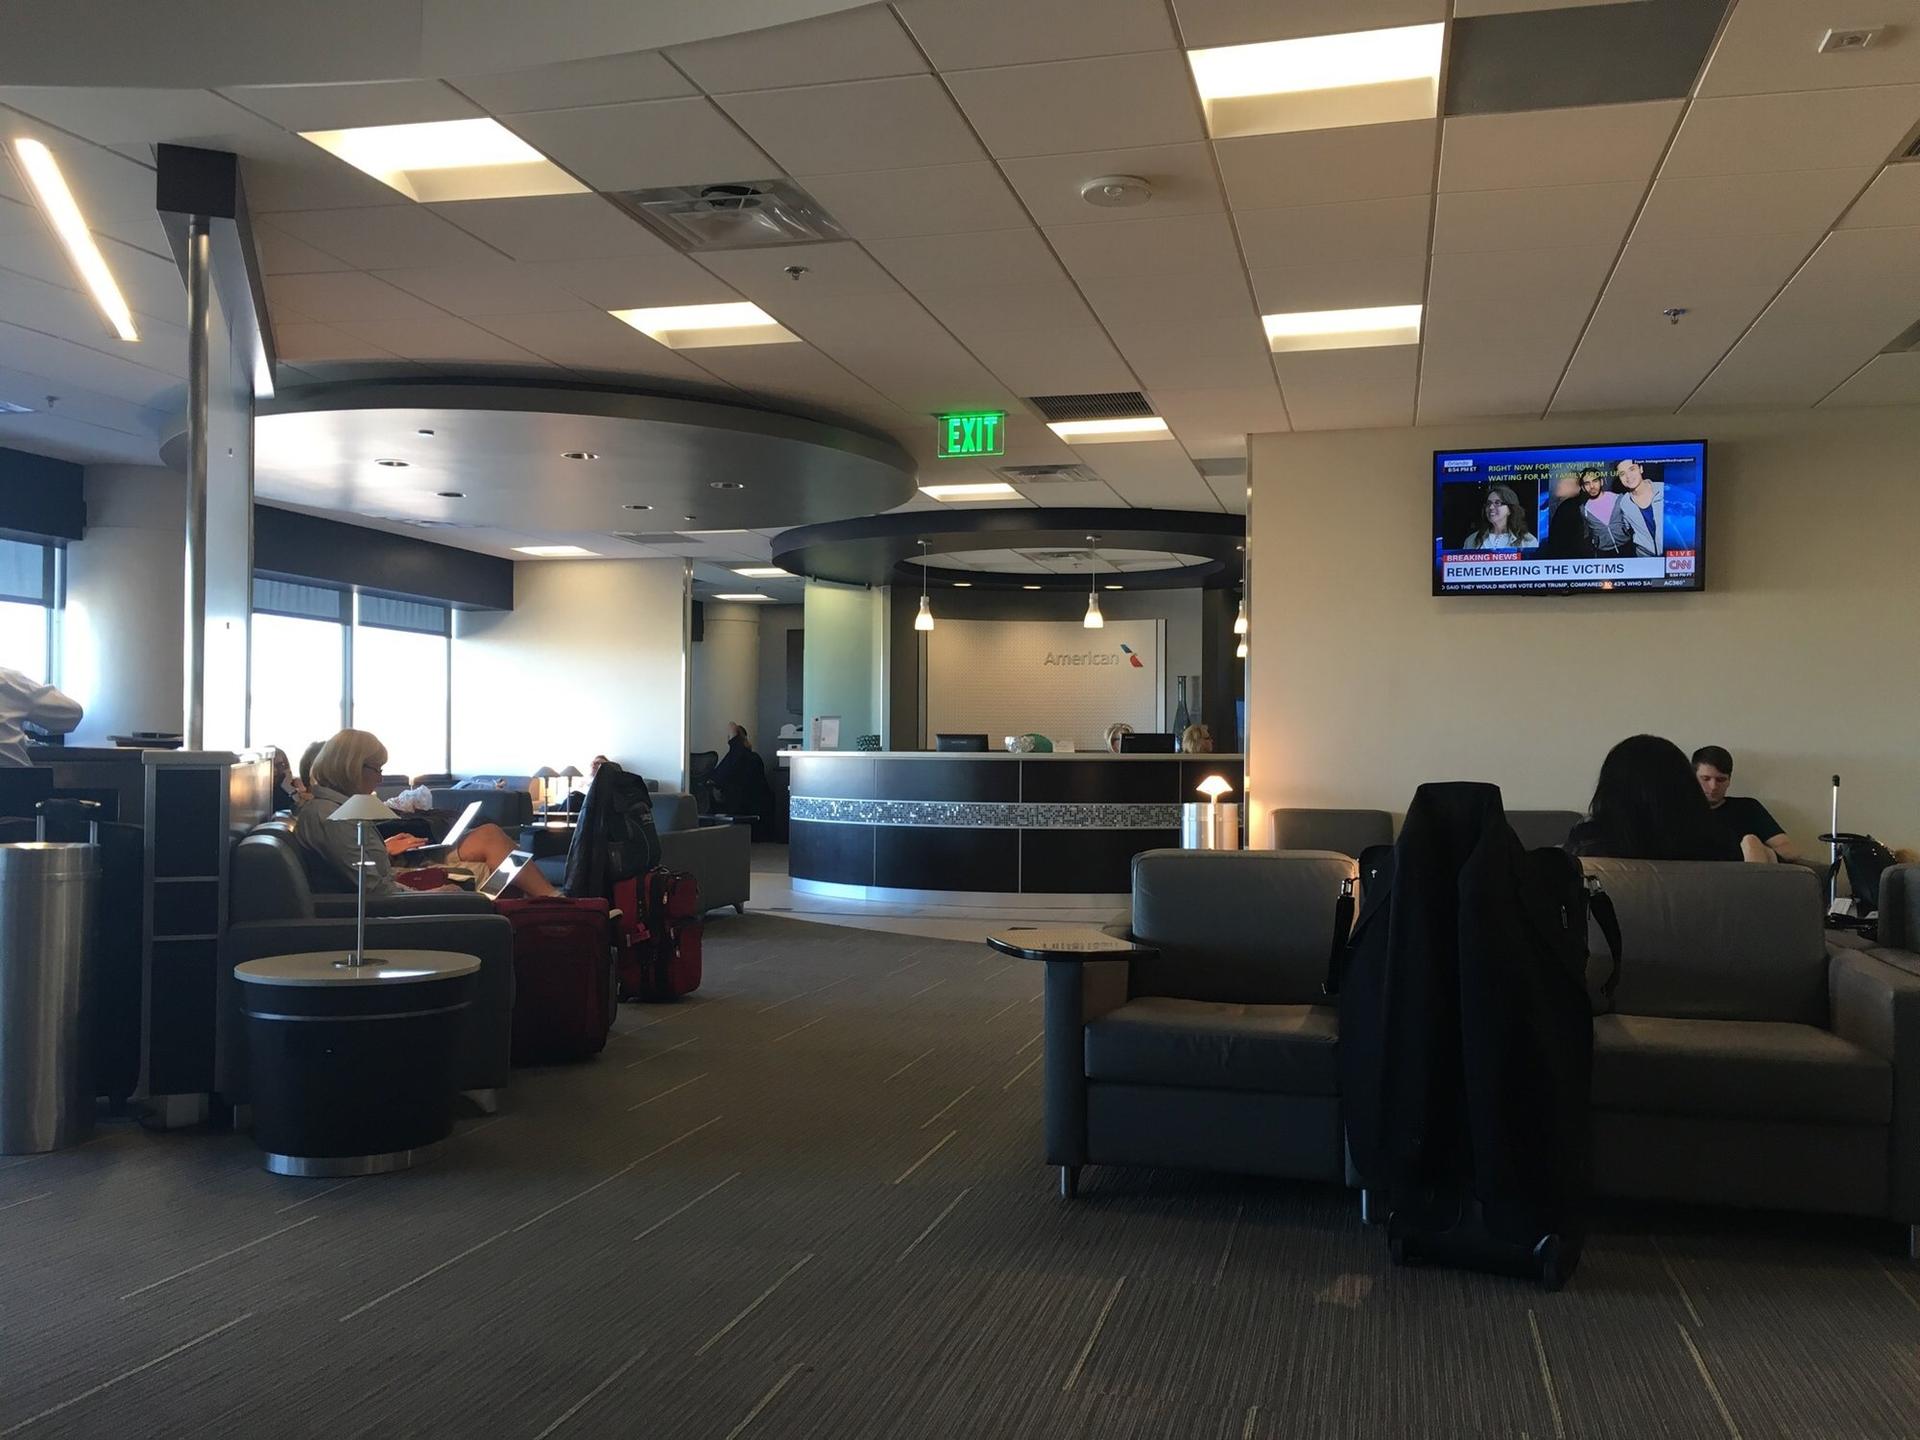 American Airlines Admirals Club (Gates A19-A21) image 14 of 16